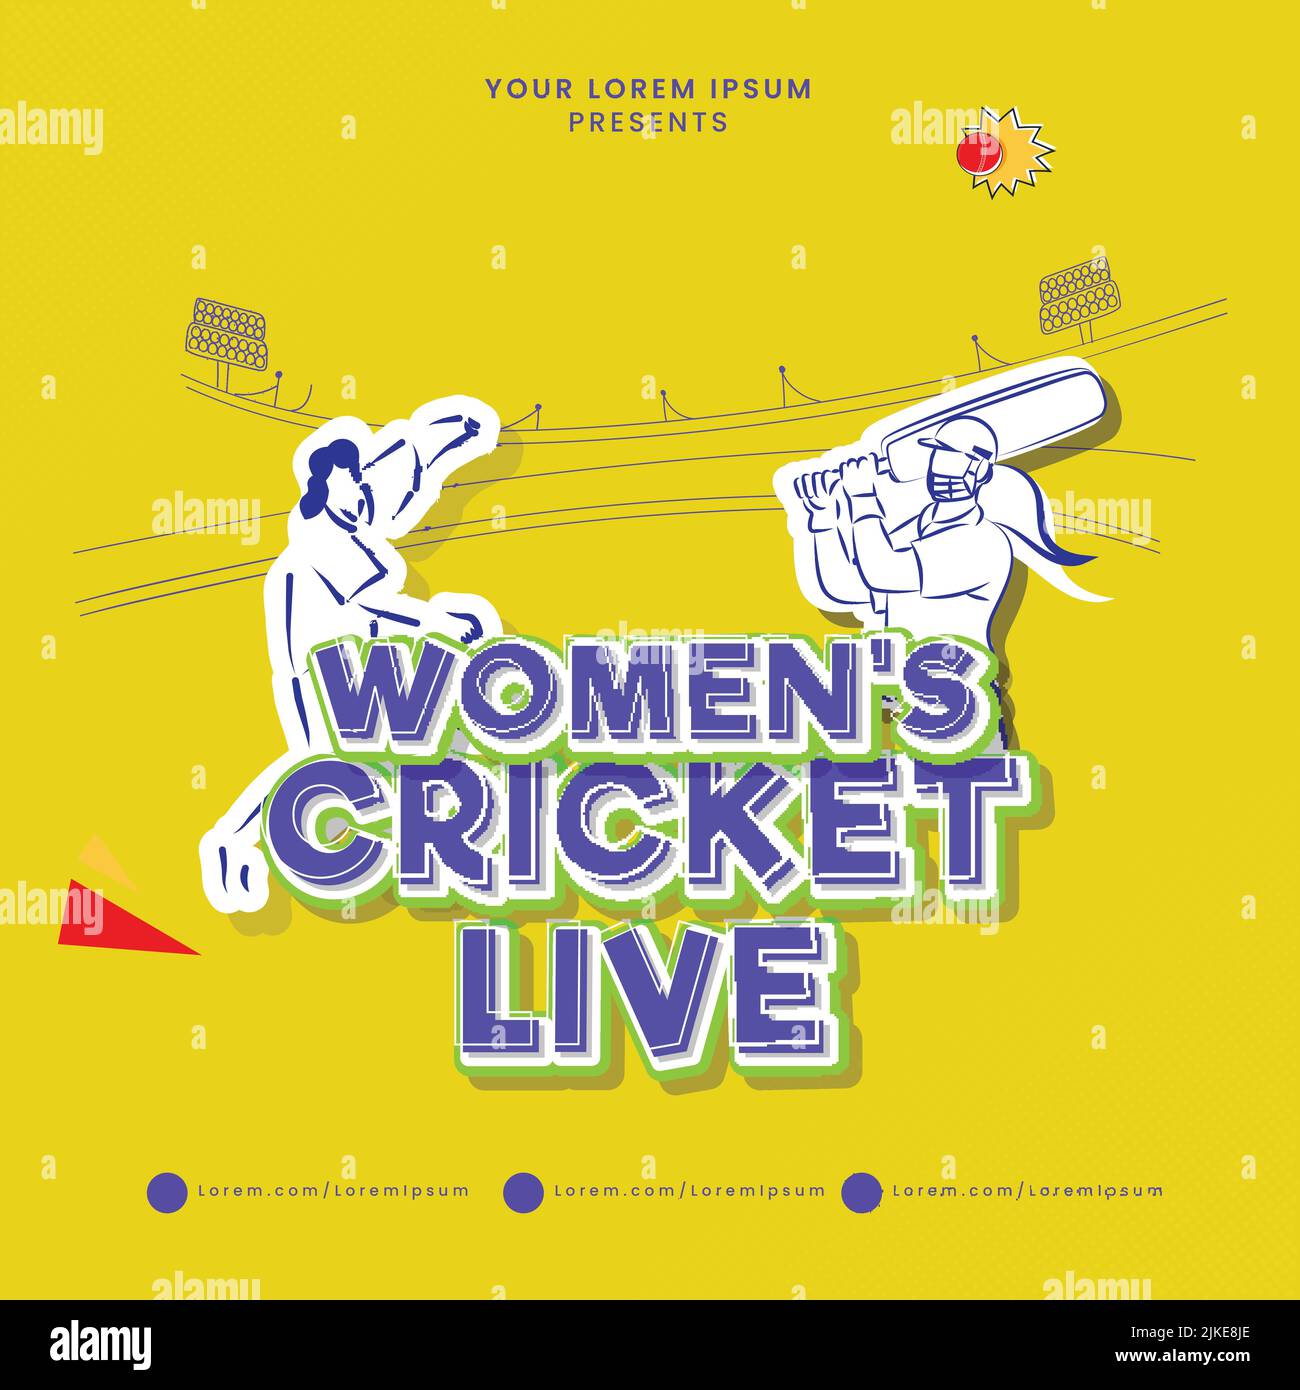 Stylish Sticker Style Women's Cricket Live Font With Cricketer Players On Yellow Stadium Background. Stock Vector